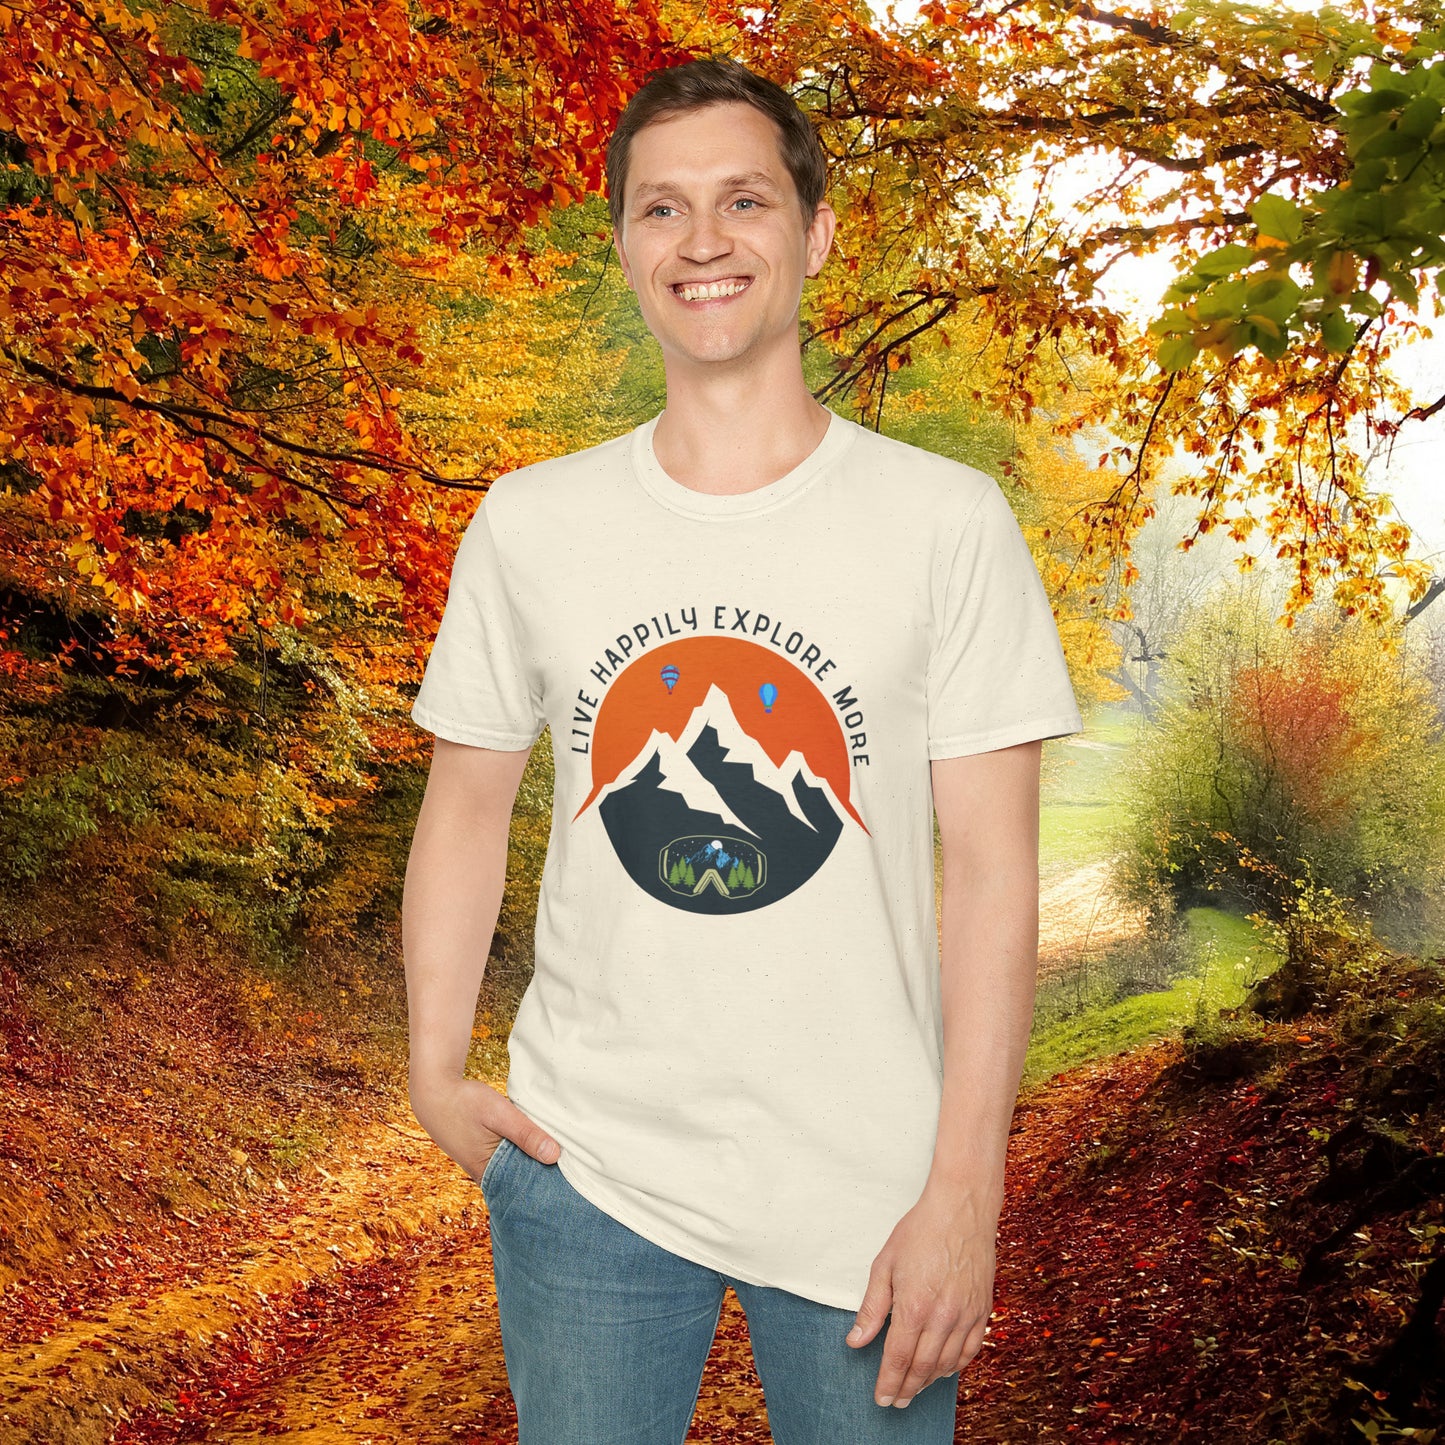 “LIVE HAPPILY EXPLORE MORE” message on this mountain sports inspired Unisex Softstyle T-Shirt.